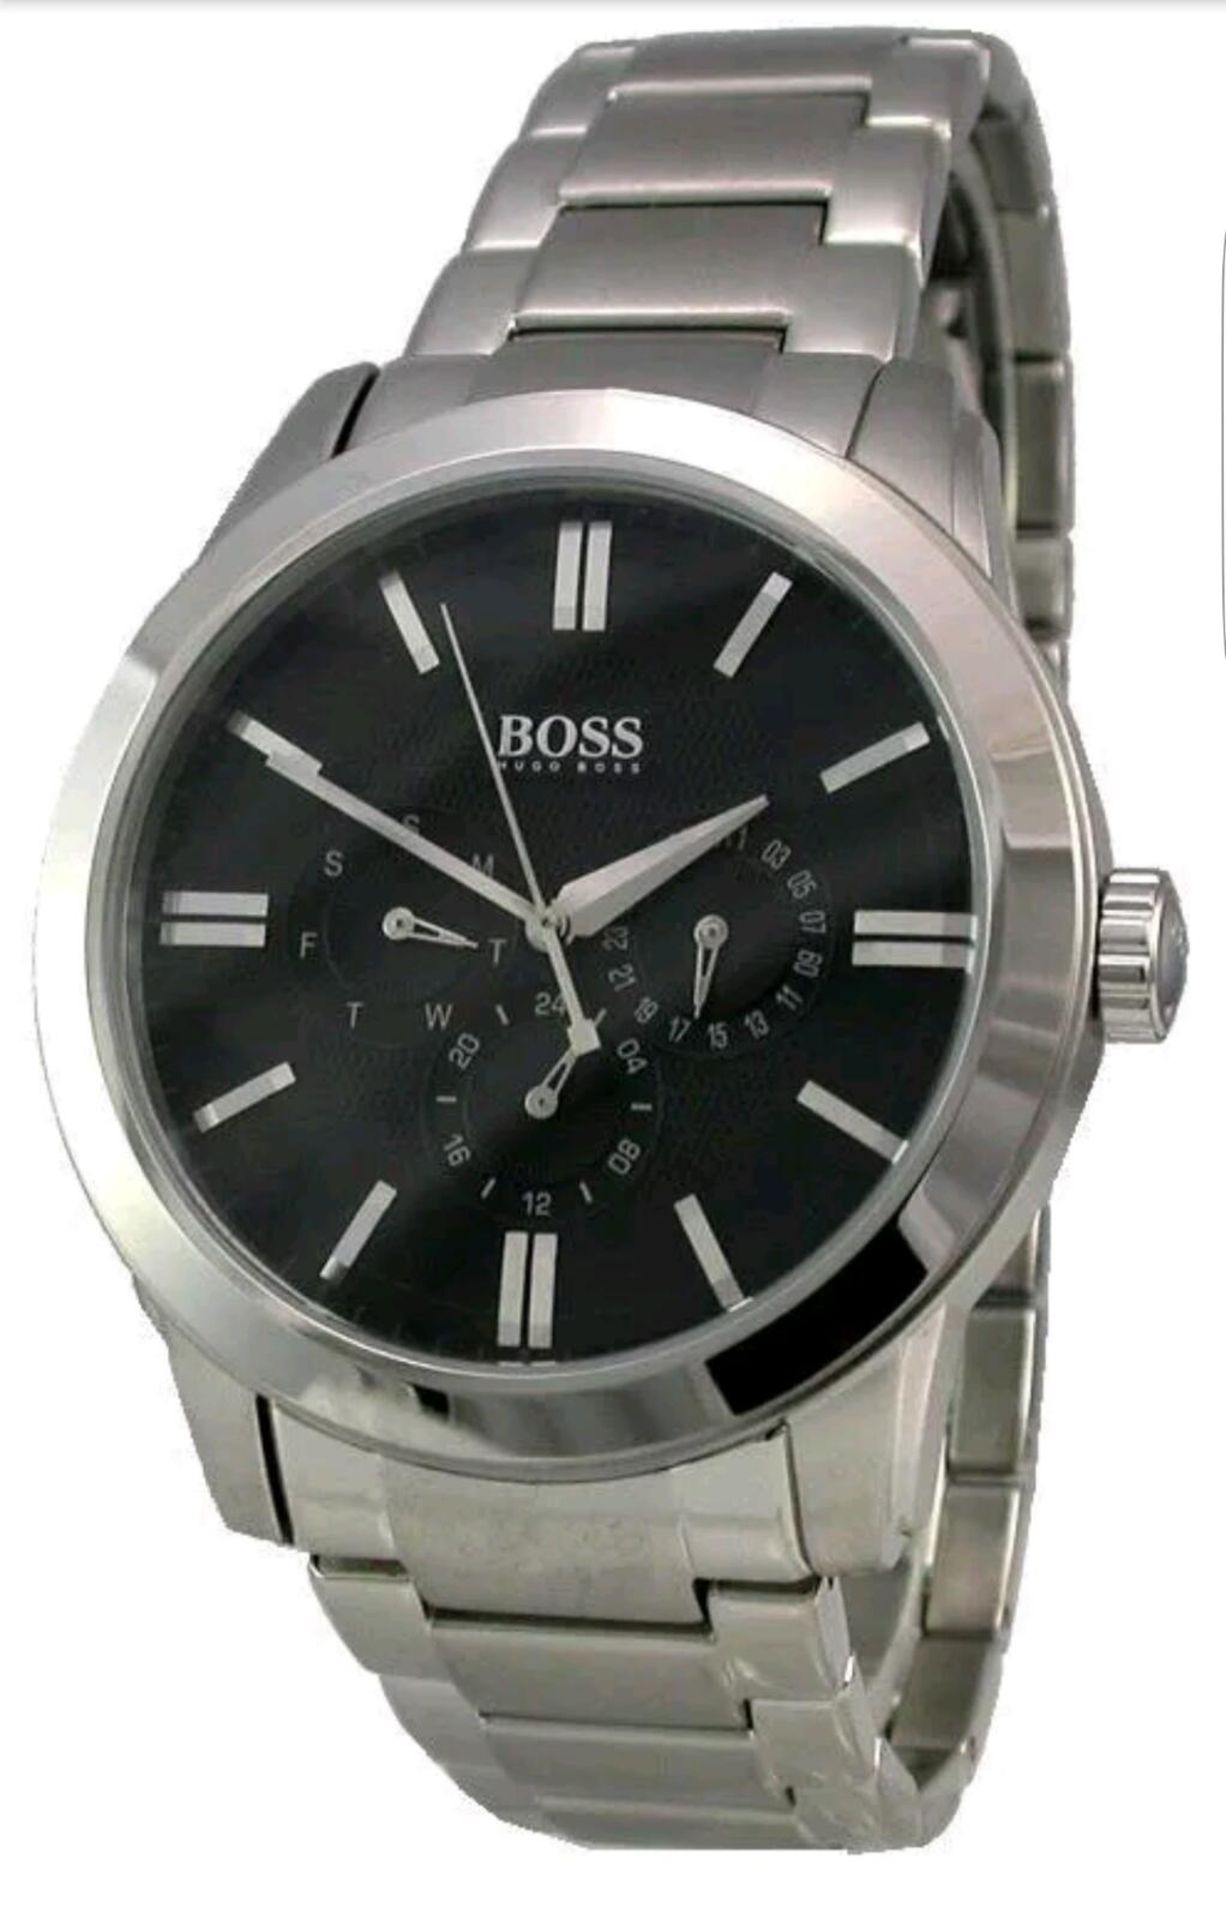 BRAND NEW HUGO BOSS 1512893, COMPLETE WITH ORIGINAL BOX AND MANUAL - RRP £399